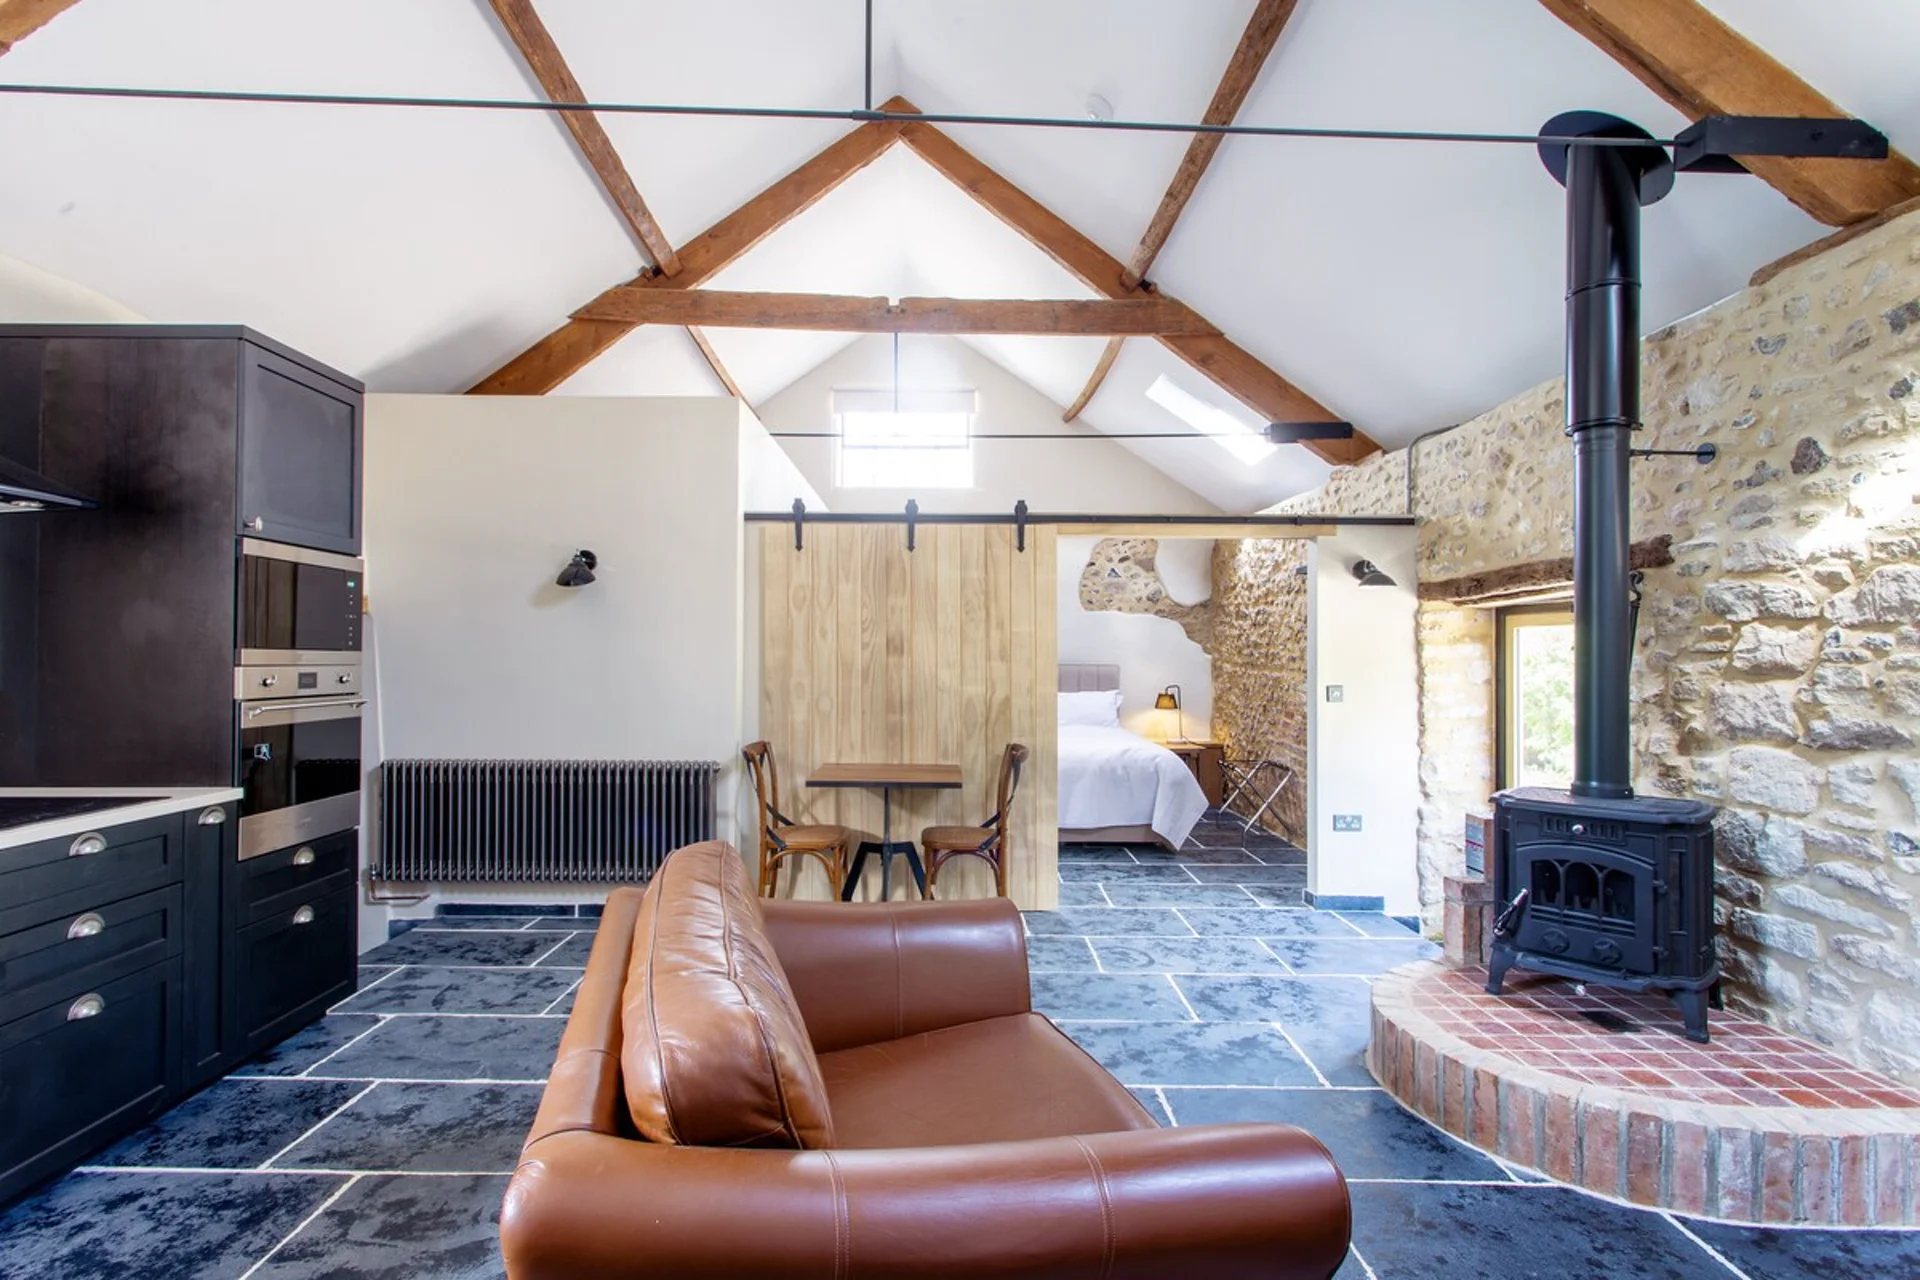 vaulted ceiling, wood stove and leather sofa